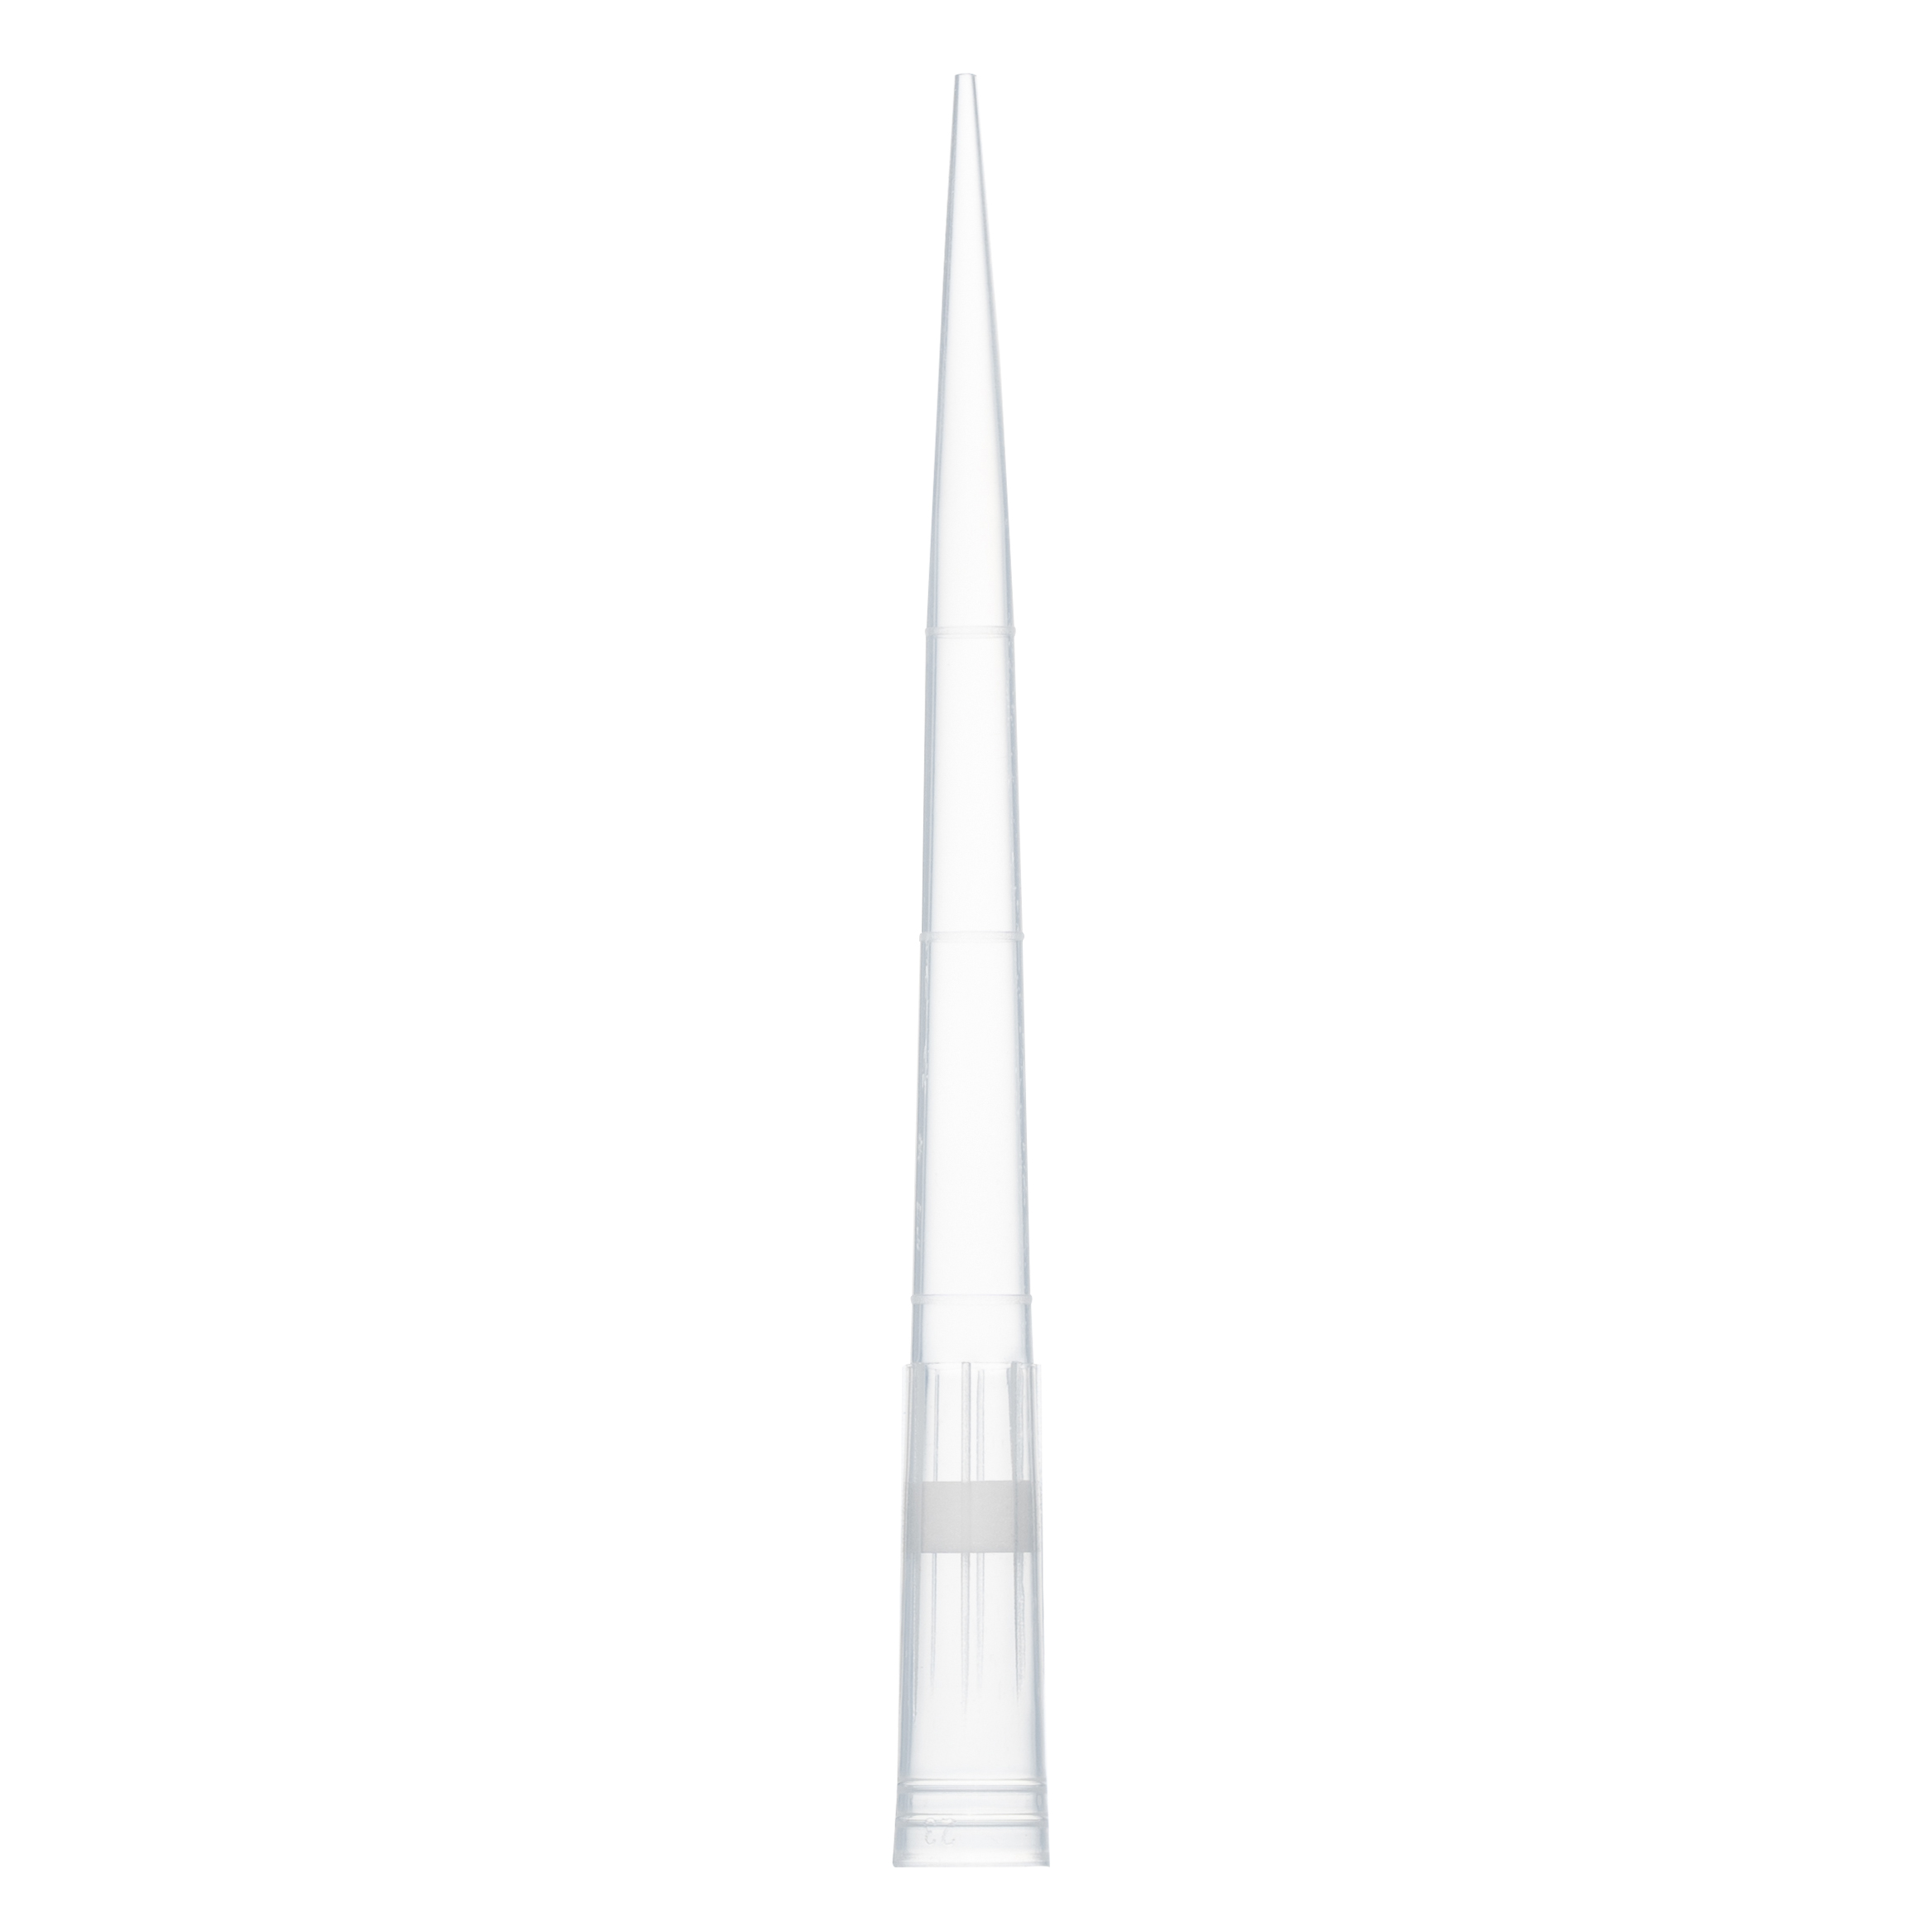 1250ul filter pipette tips